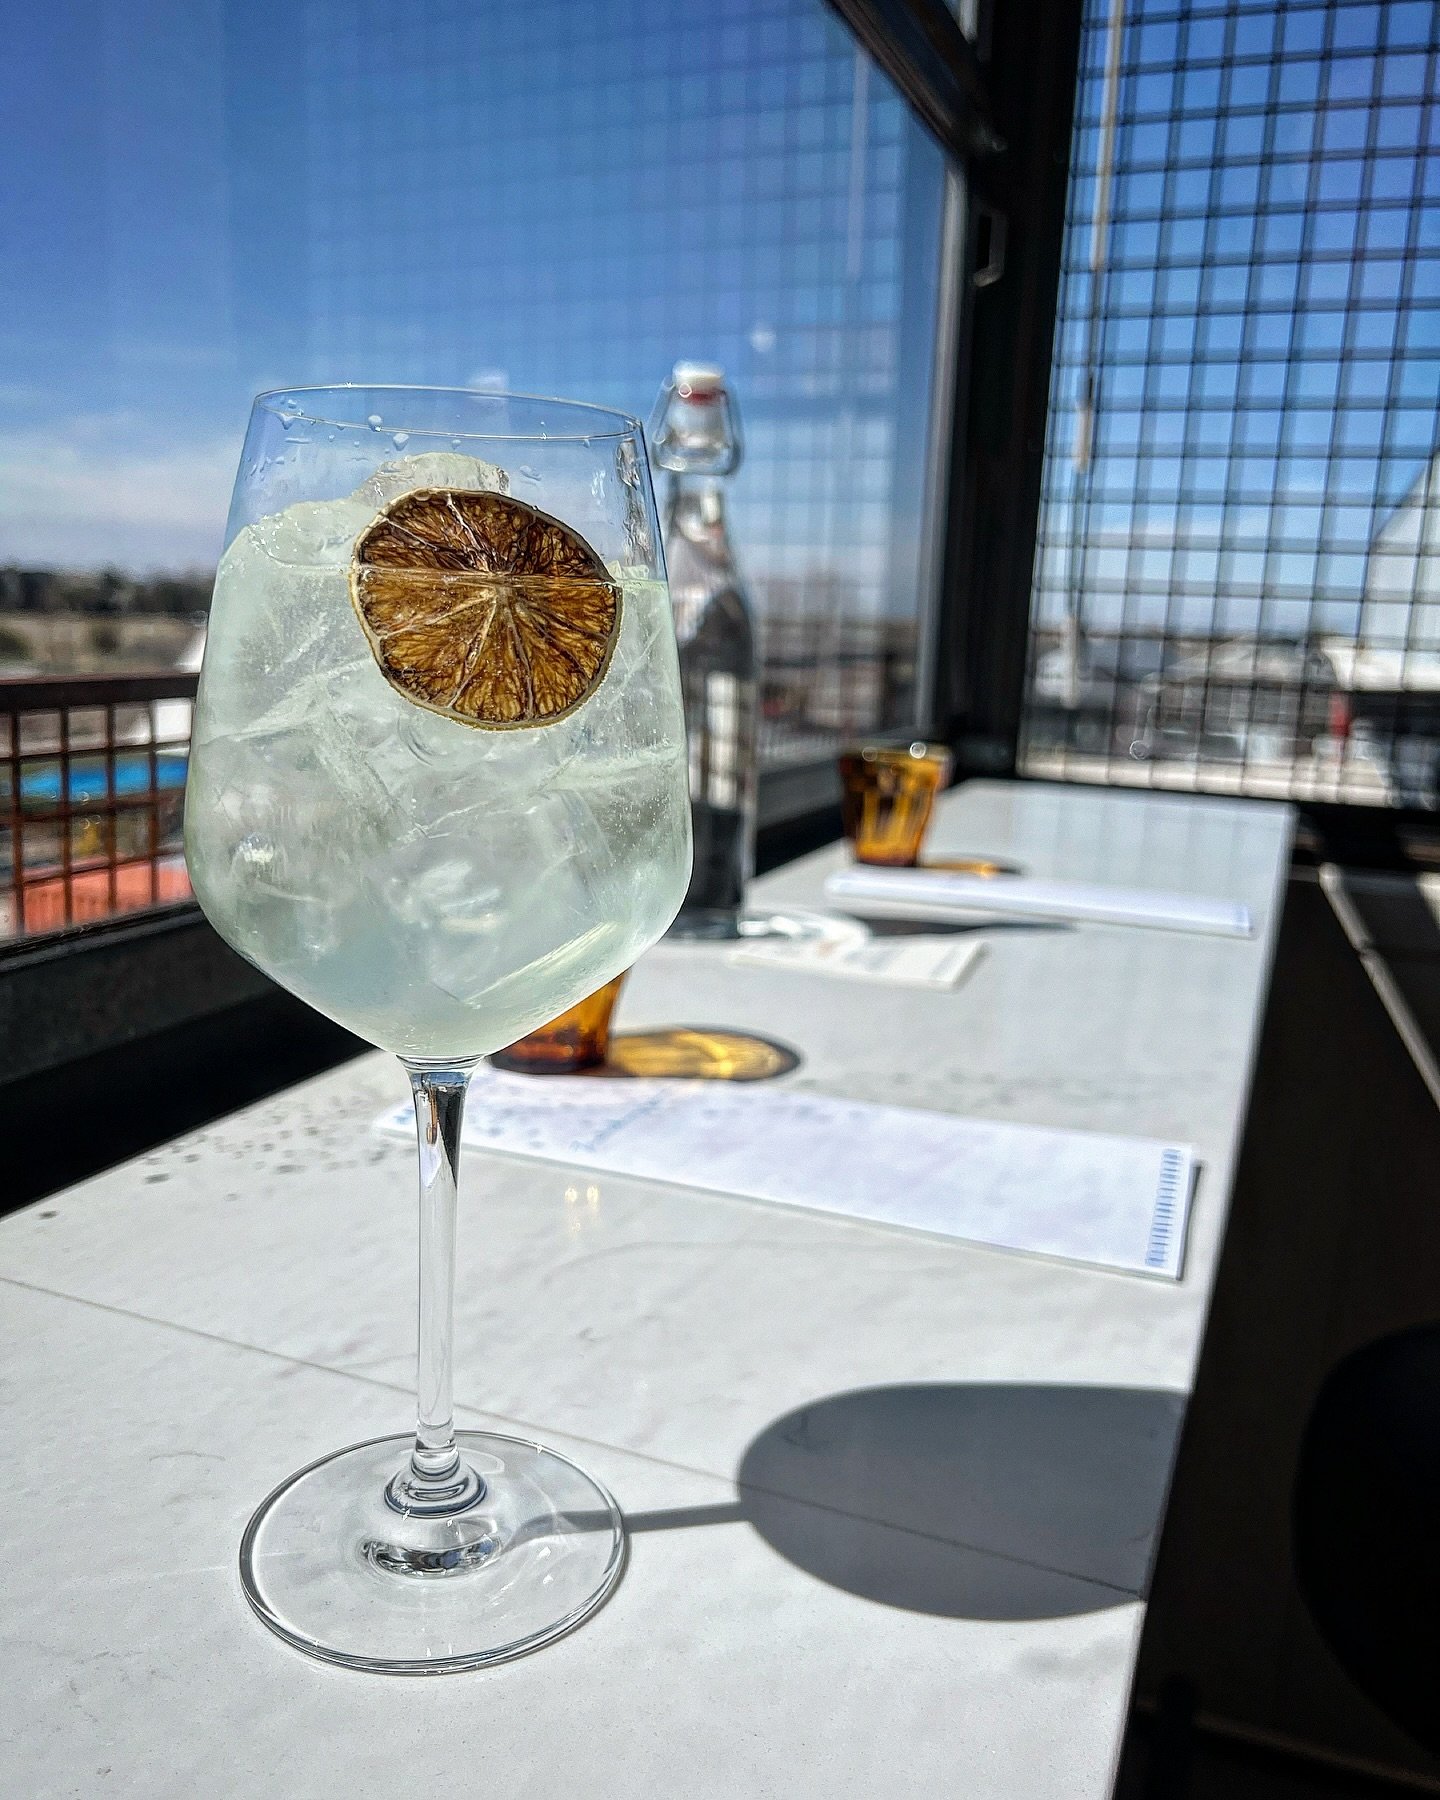 No Sunday scaries here&hellip; it&rsquo;s a beautiful day ☀️

Post up, bask in the sun, look at the mountains and we highly recommend sipping on our @nordenaquavit spritz &ldquo;Kill Your Darlings&rdquo;. Here &lsquo;till 9 ✌️